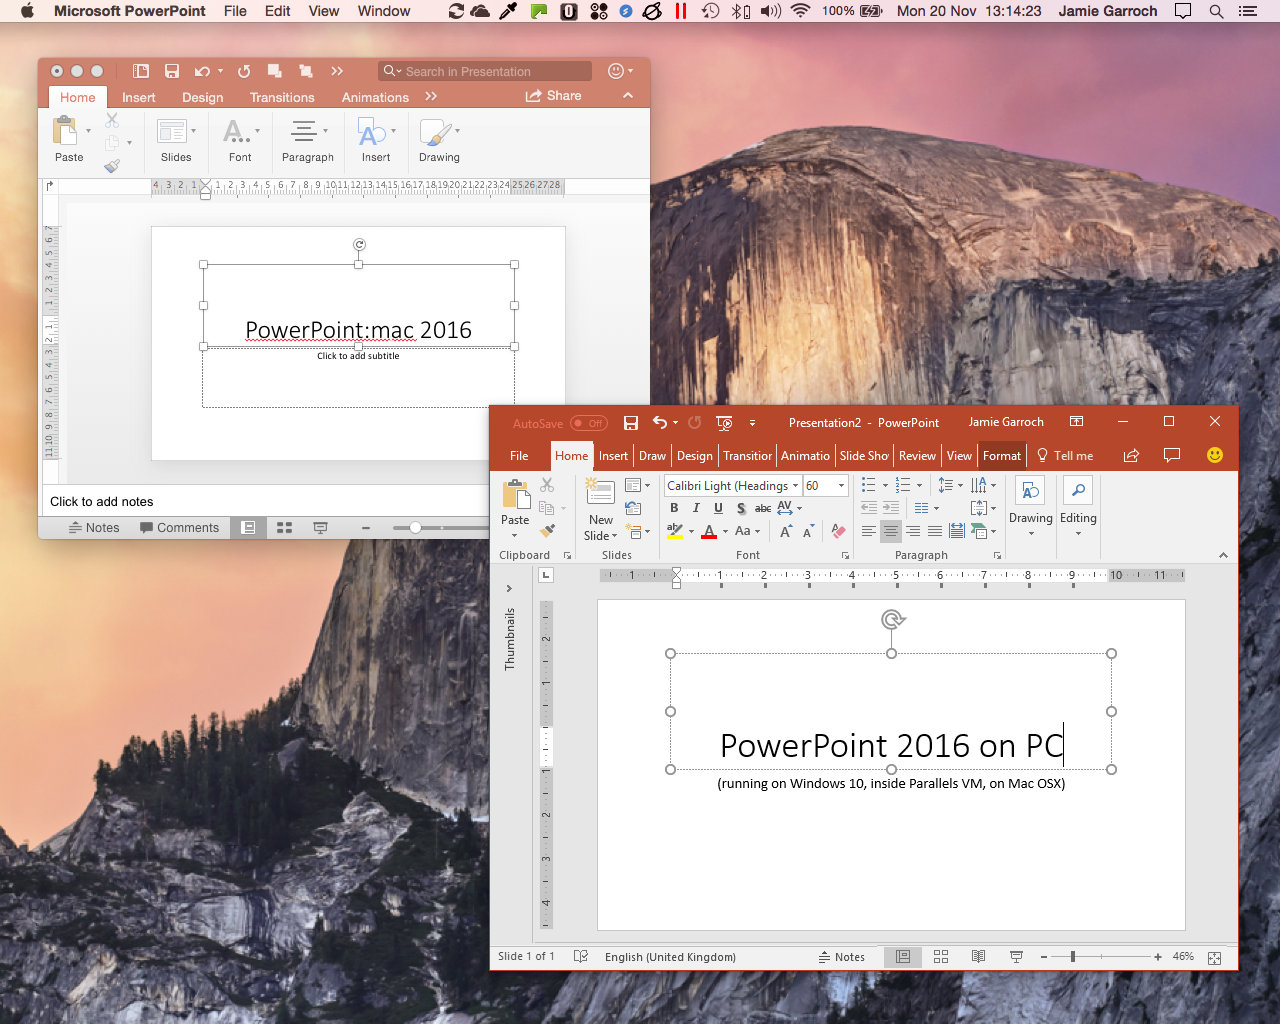 PowerPoint 2016 Mac and PC together